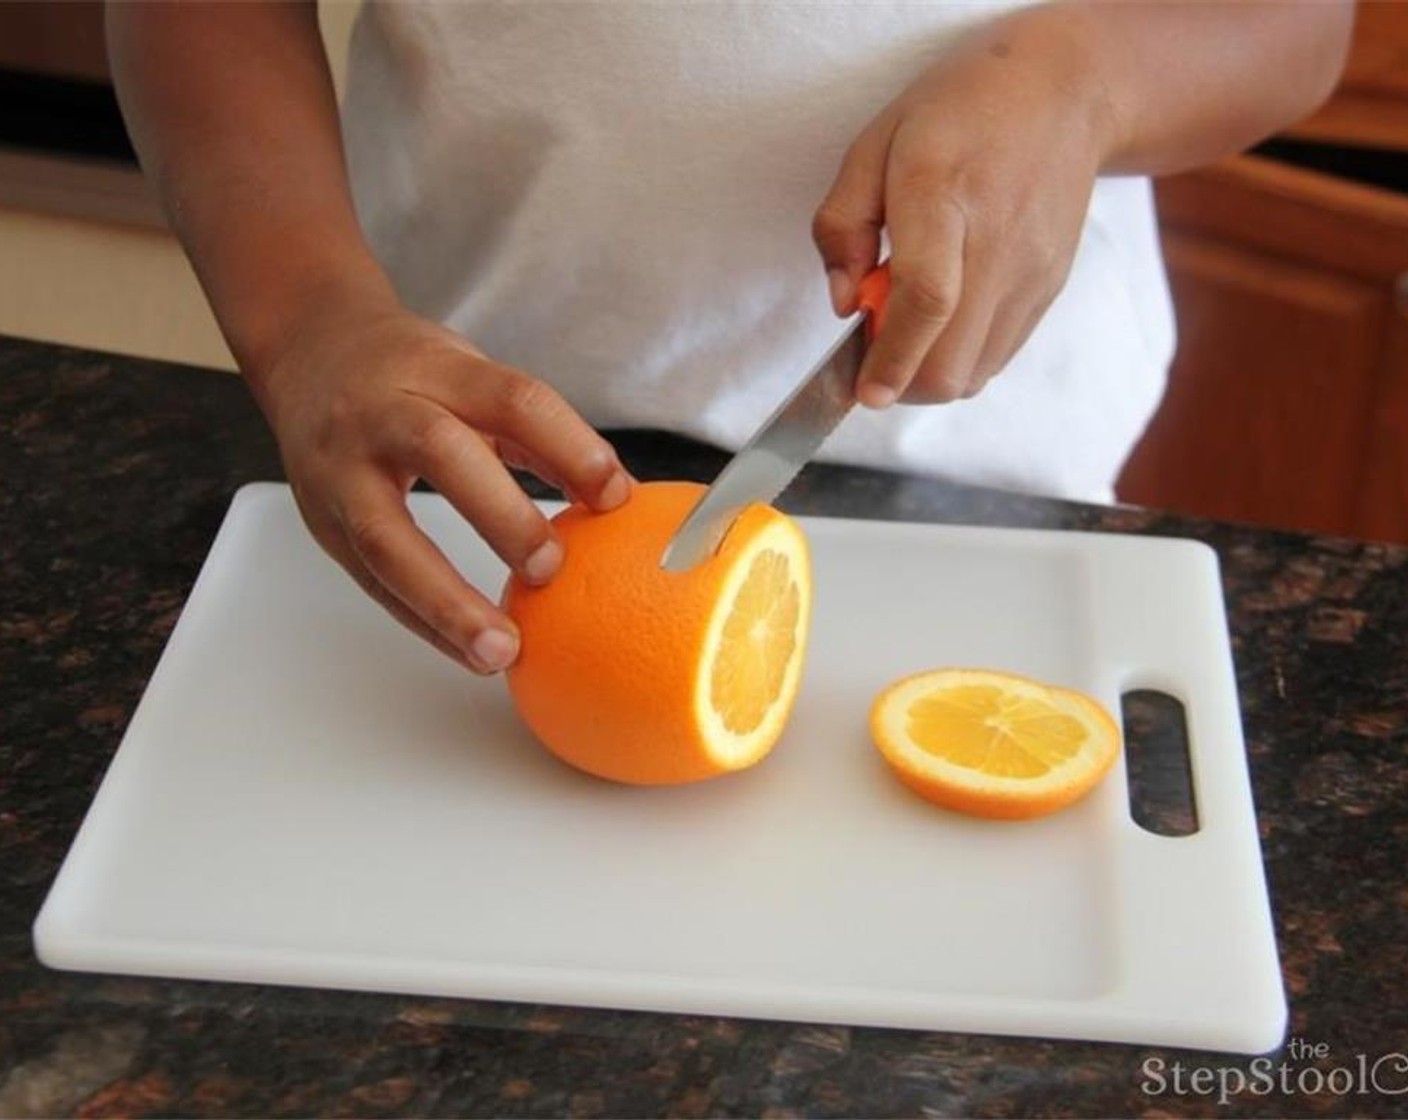 step 1 Start by cutting the Orange (1) into thin slices